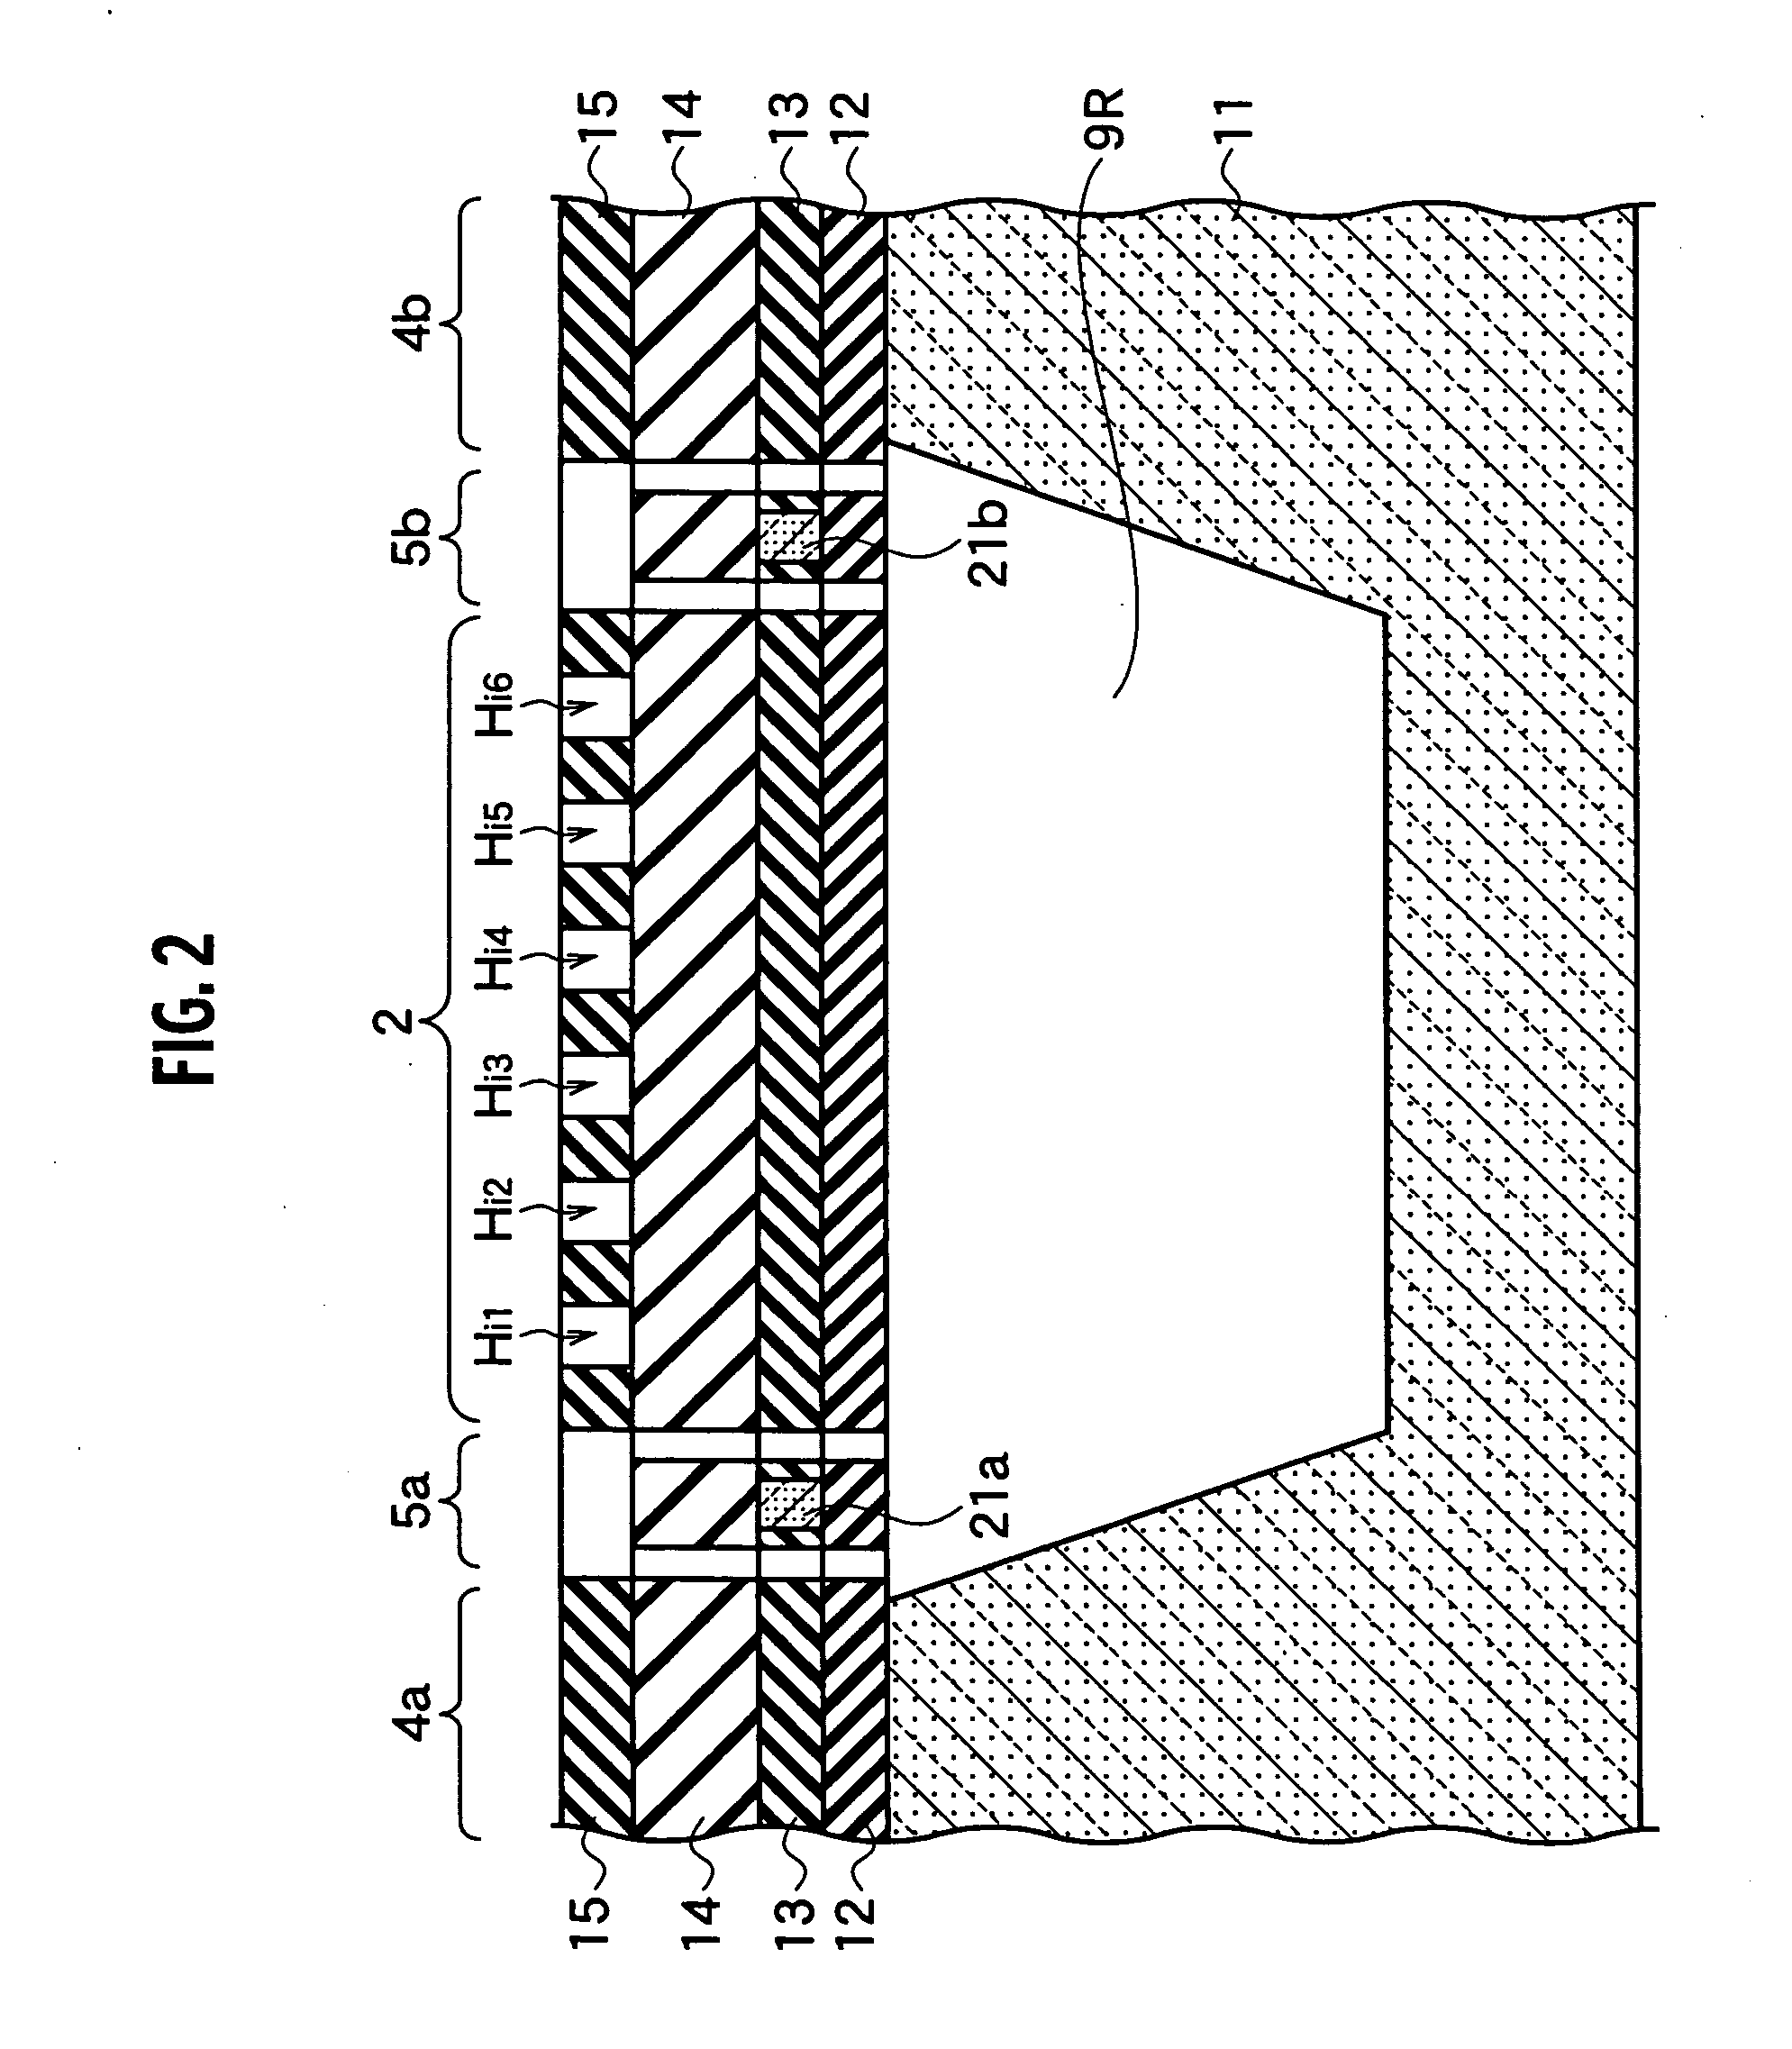 Opto-acoustoelectric device and methods for analyzing mechanical vibration and sound